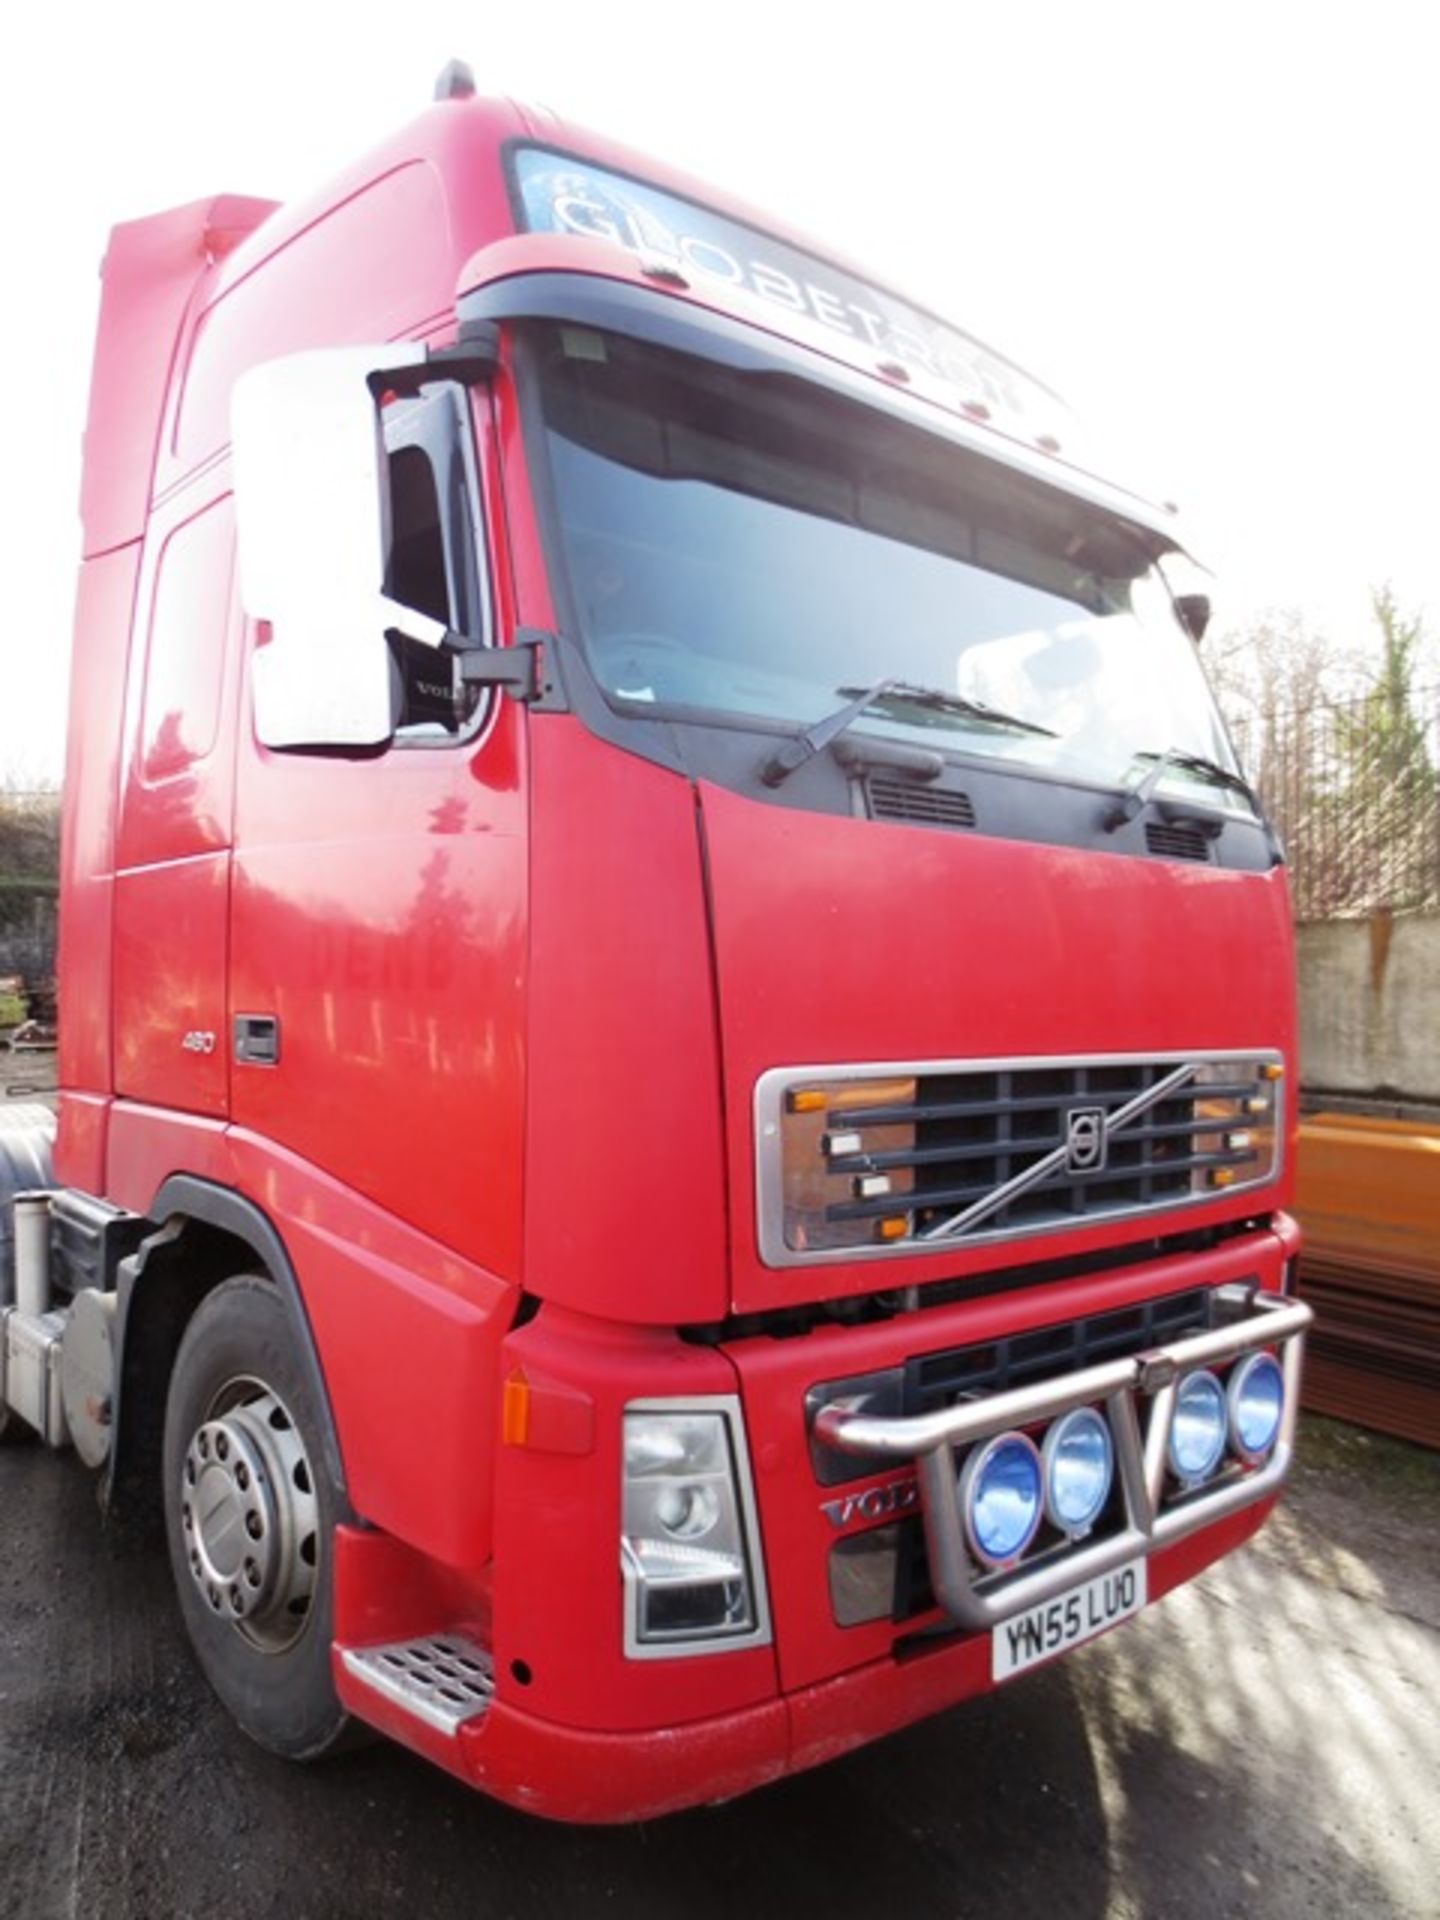 Volvo FH12 460 Globetrotter XL, double sleeper cab 6x2 tractor unit, Registration No. YN55 LUO, Year - Image 2 of 15